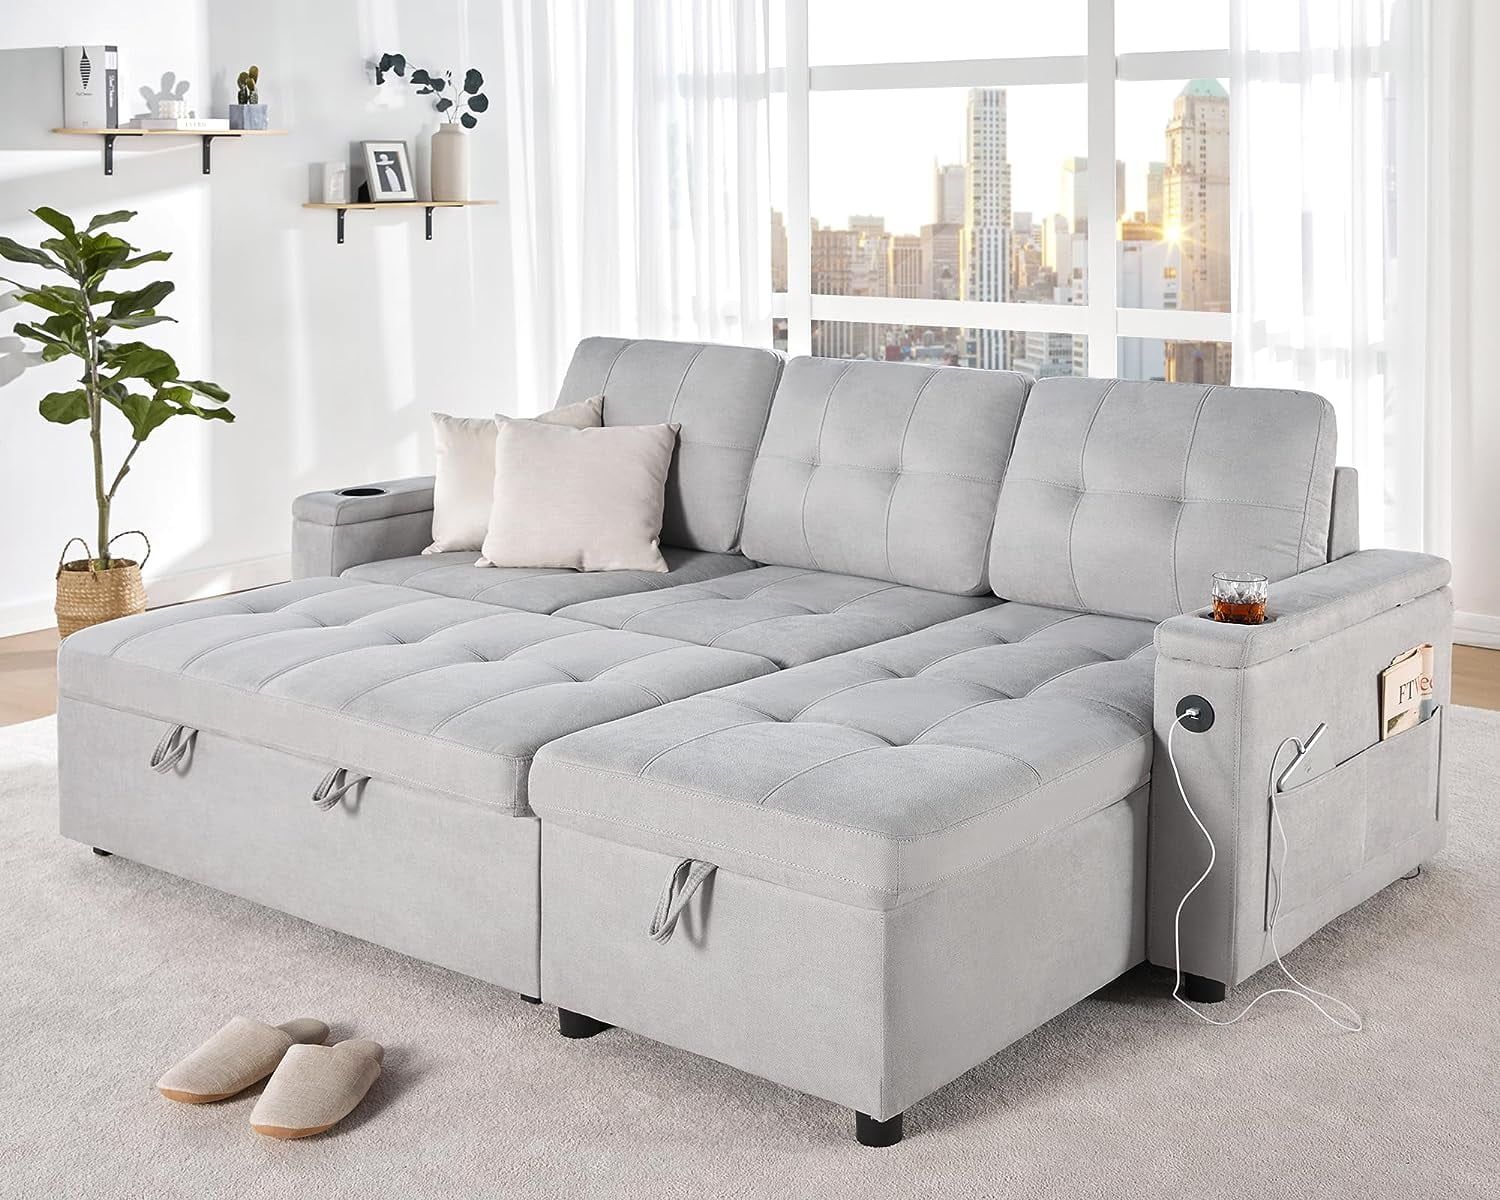 Papajet Sleeper Sofa, Modern Tufted Convertible Sofa Bed, Usb Charging  Ports & Cup Holders, L Shaped Sofa Couch With Storage Chaise, Linen Couches  For Living Room (light Grey) – Walmart Pertaining To Tufted Convertible Sleeper Sofas (View 4 of 15)